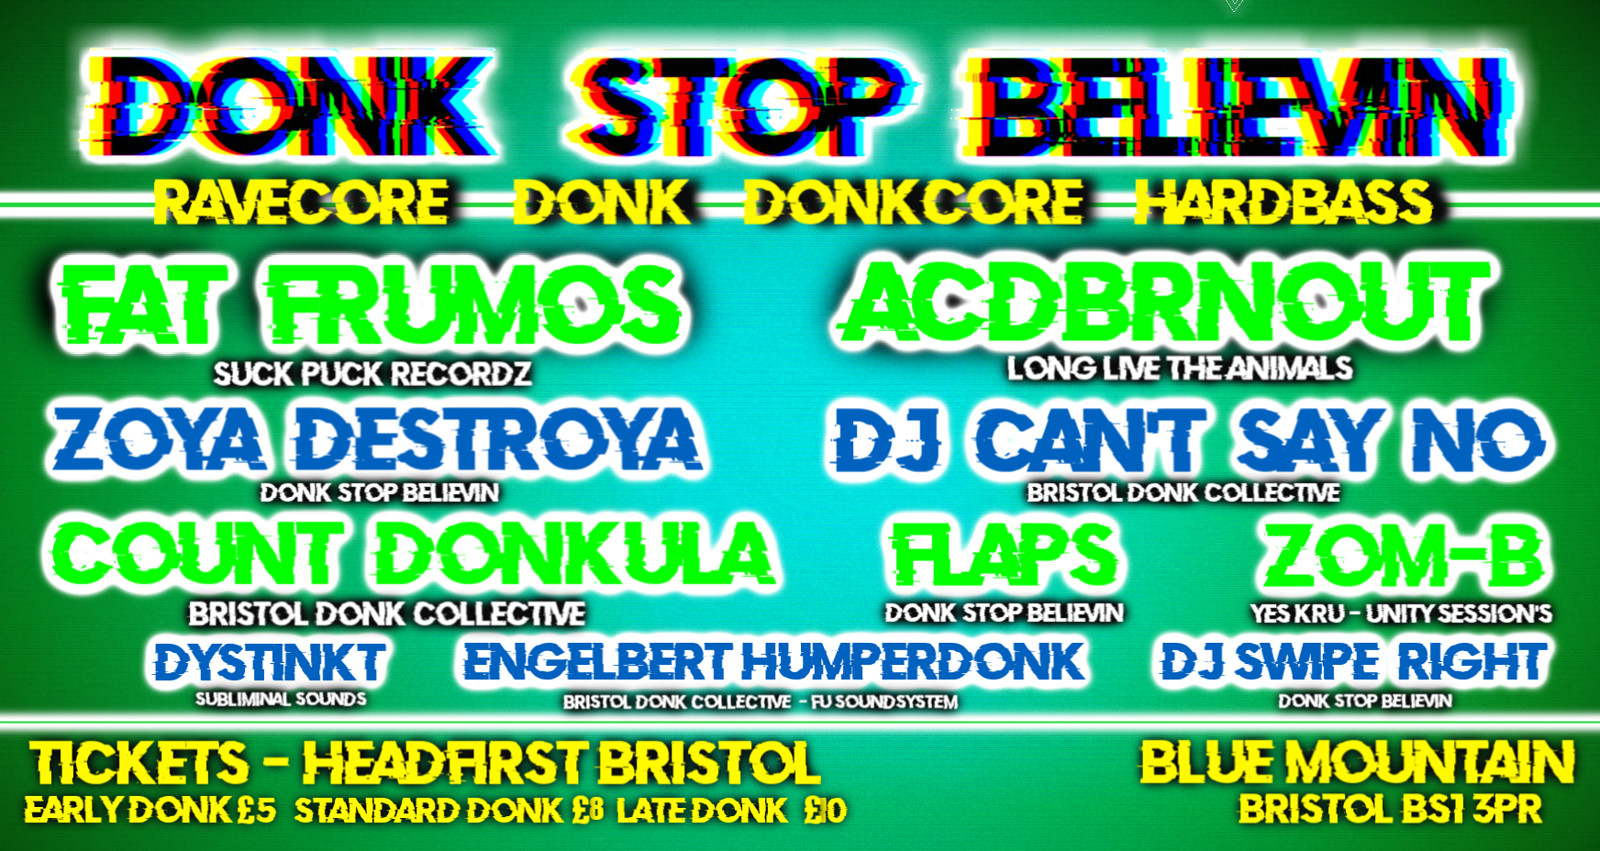 Donk Stop Believin at Blue Mountain